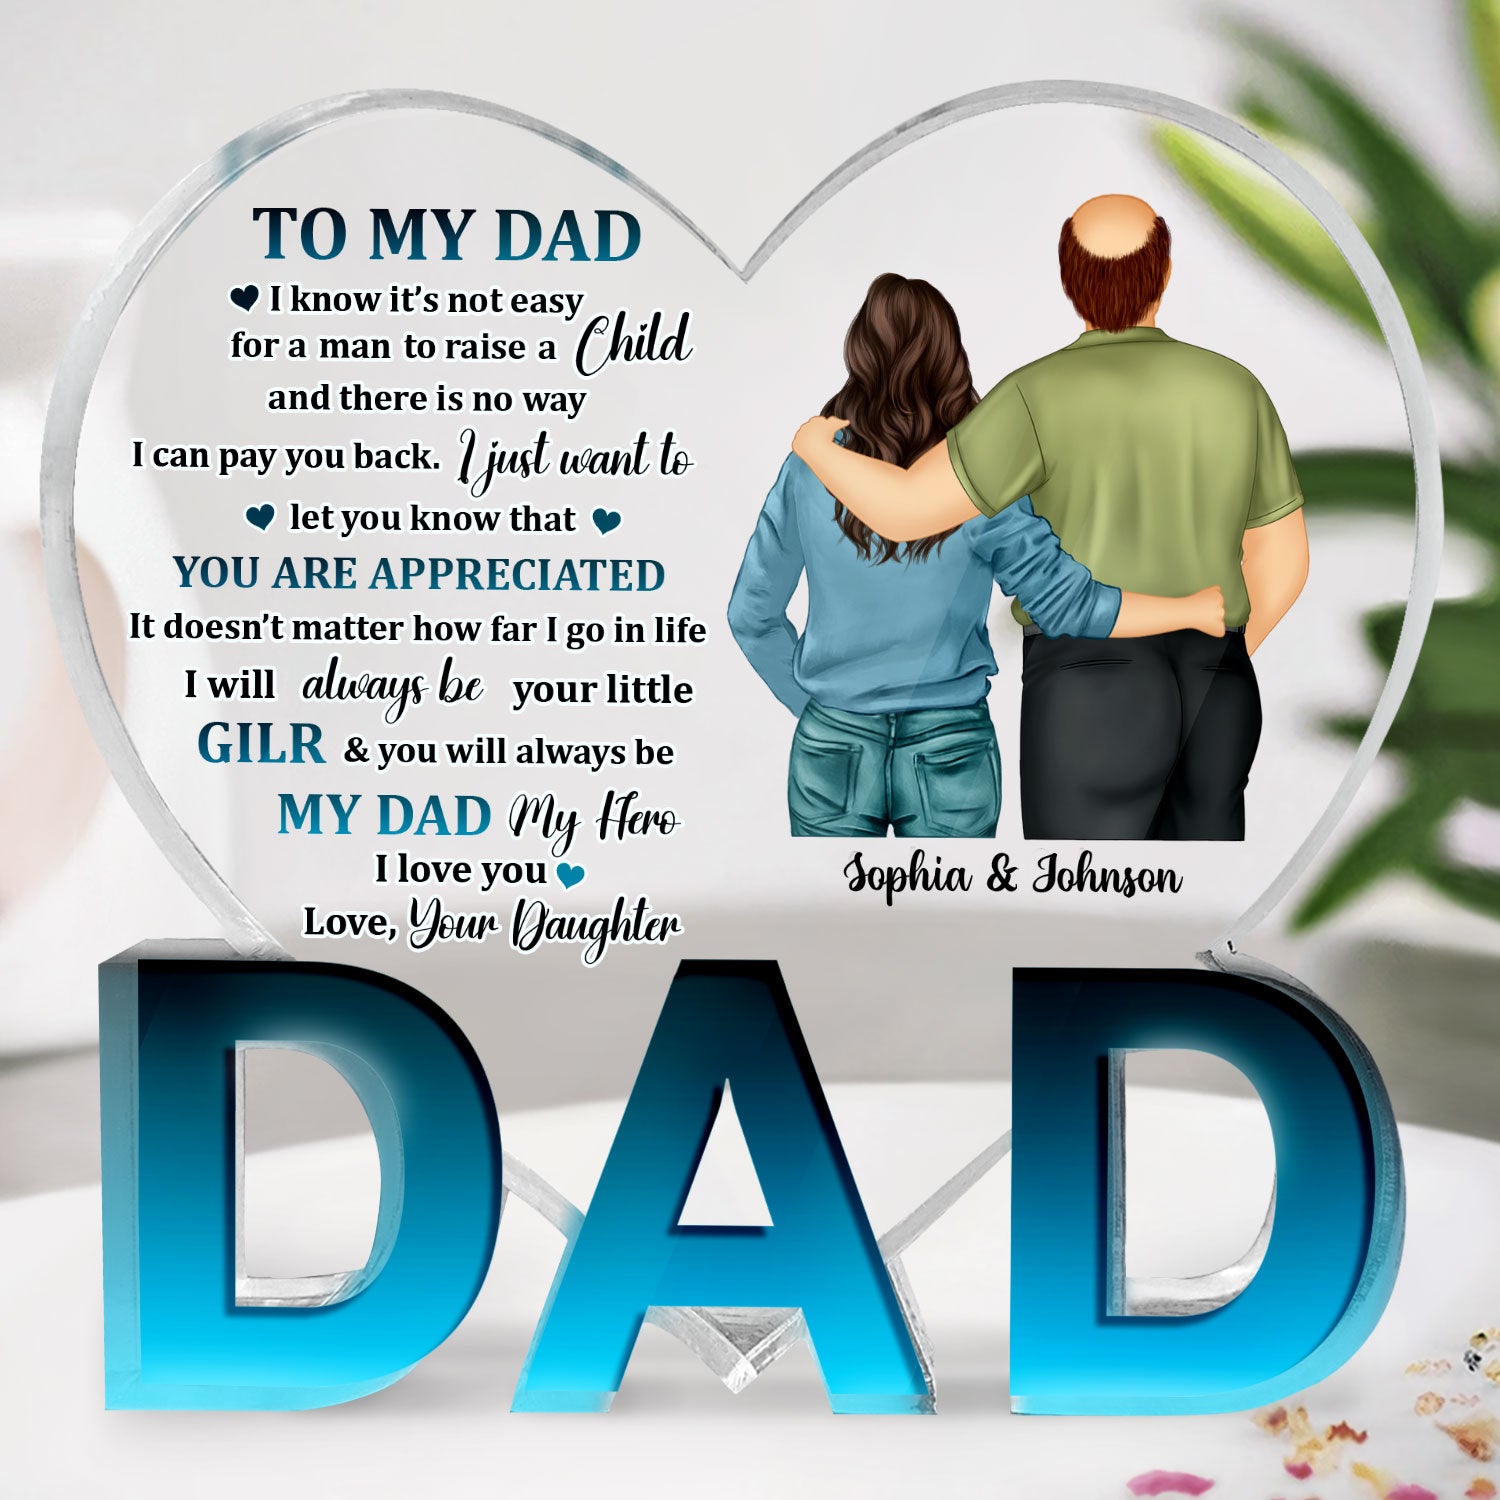 My Dad My Hero - Birthday, Loving Gift For Father - Personalized Love-Dad-Shaped Acrylic Plaque